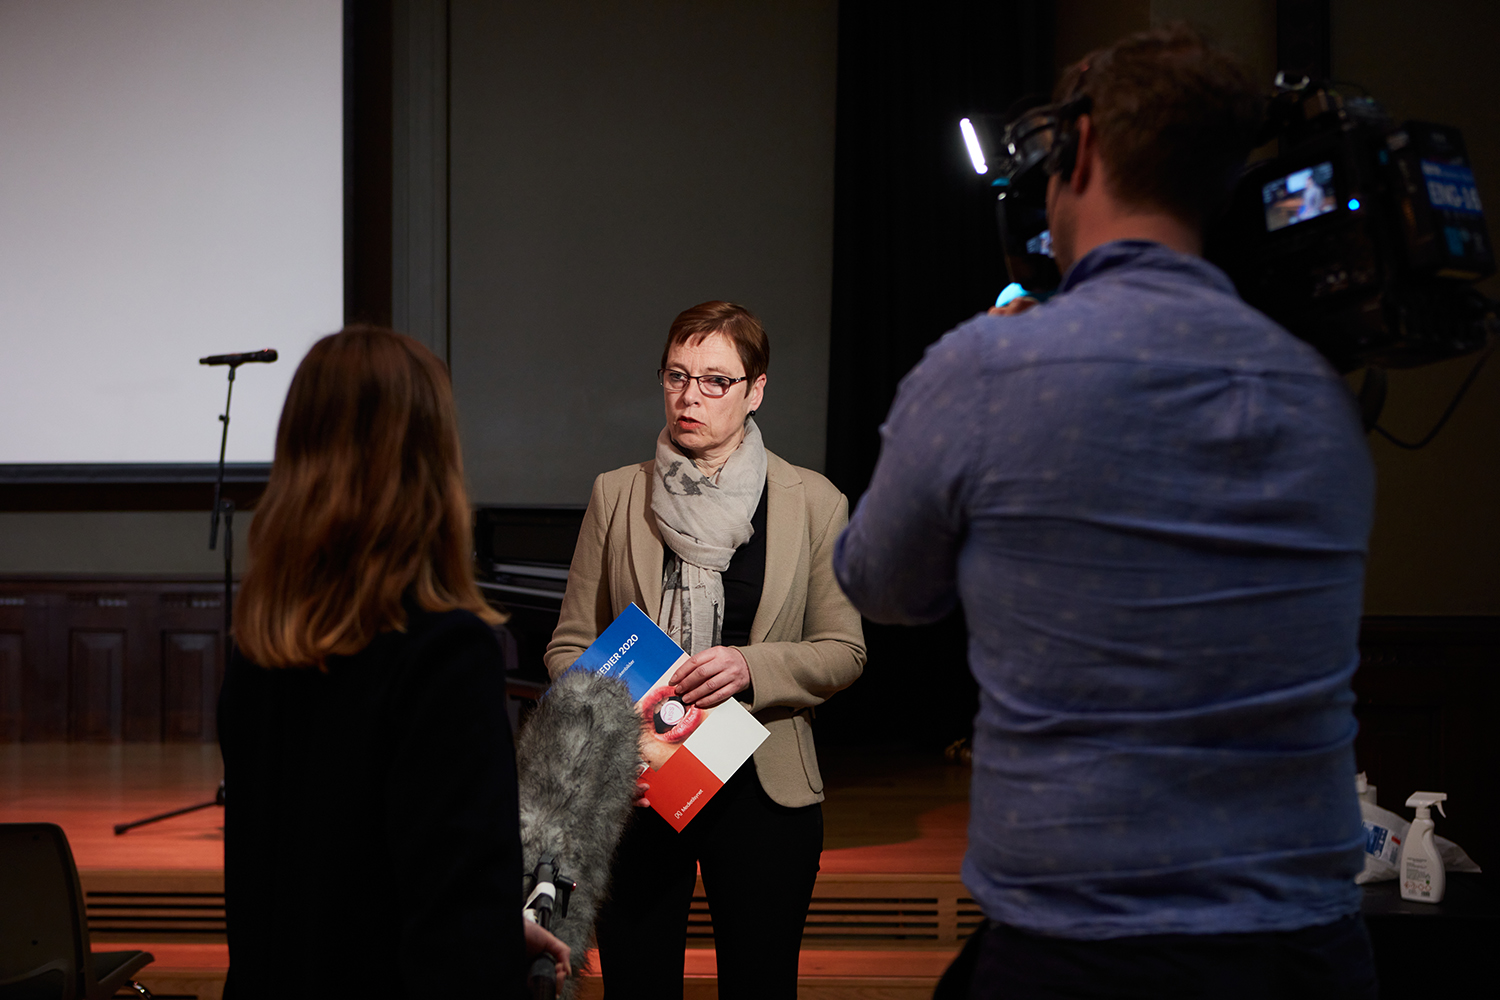 Mari Velsand, the director general at the NMA is being interviewed at an event. Photo Medietilsynet